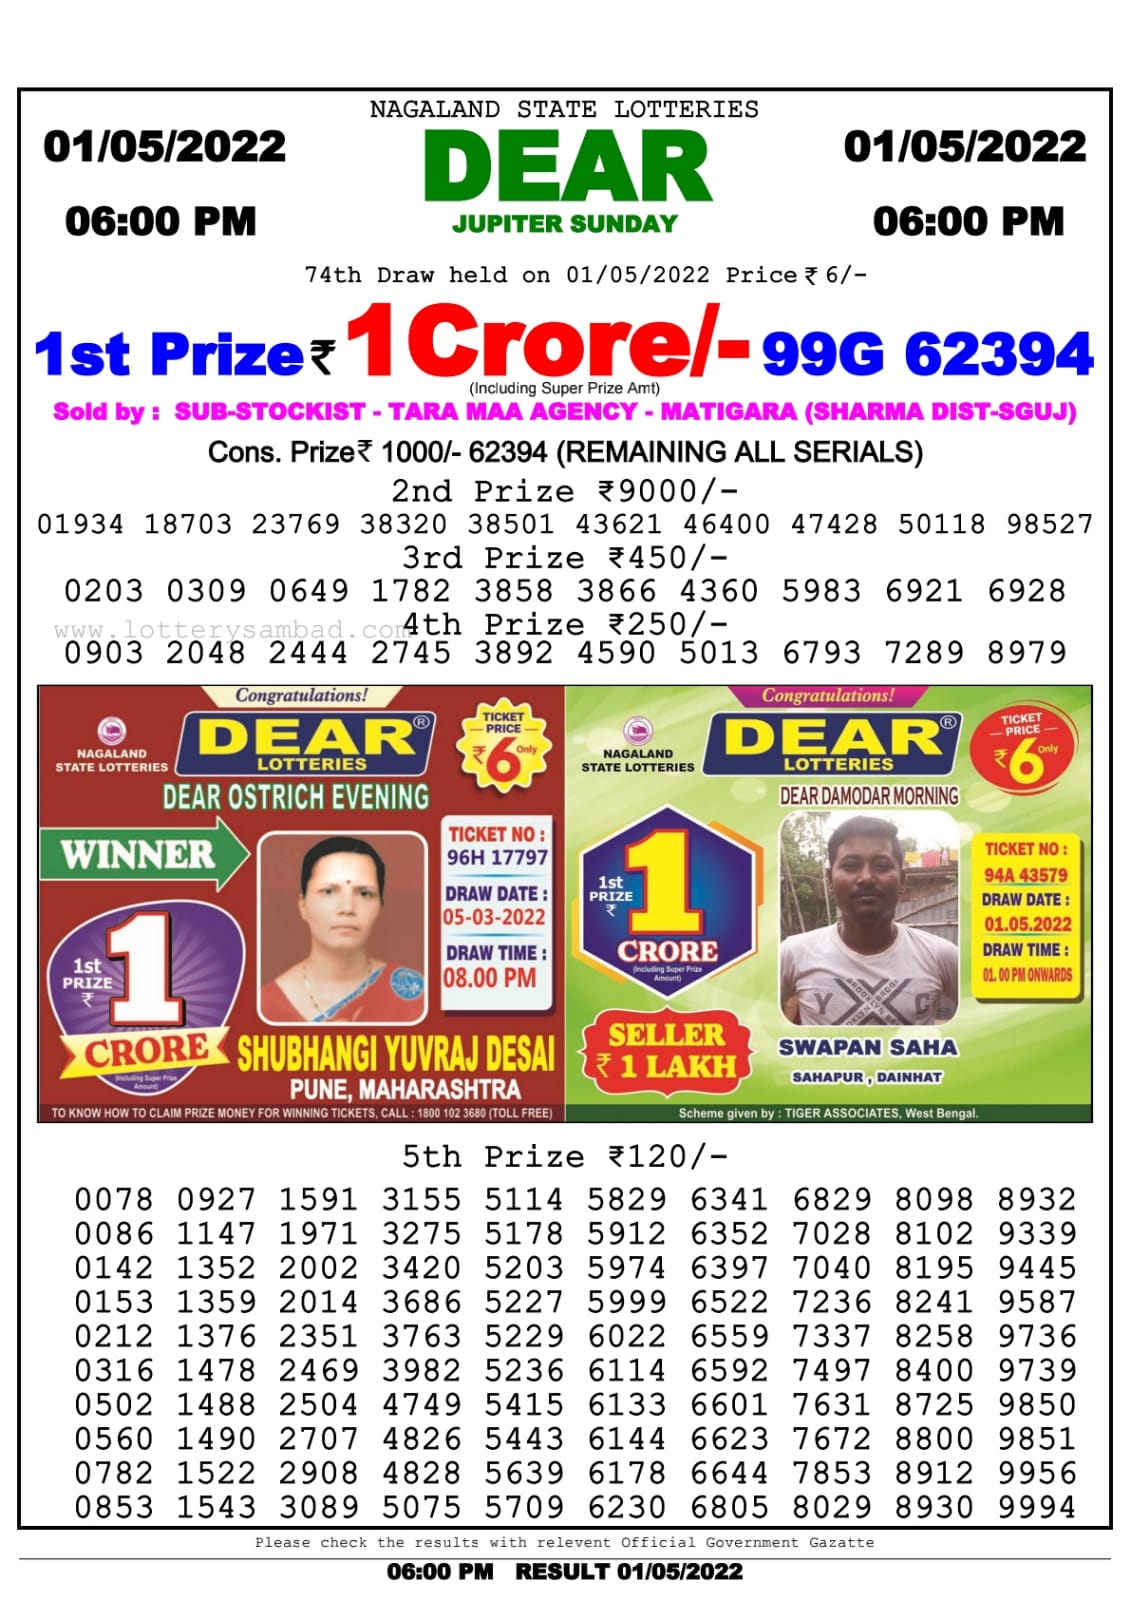 Dear Lottery Nagaland state Lottery Results 06.00 pm 01.05.2022